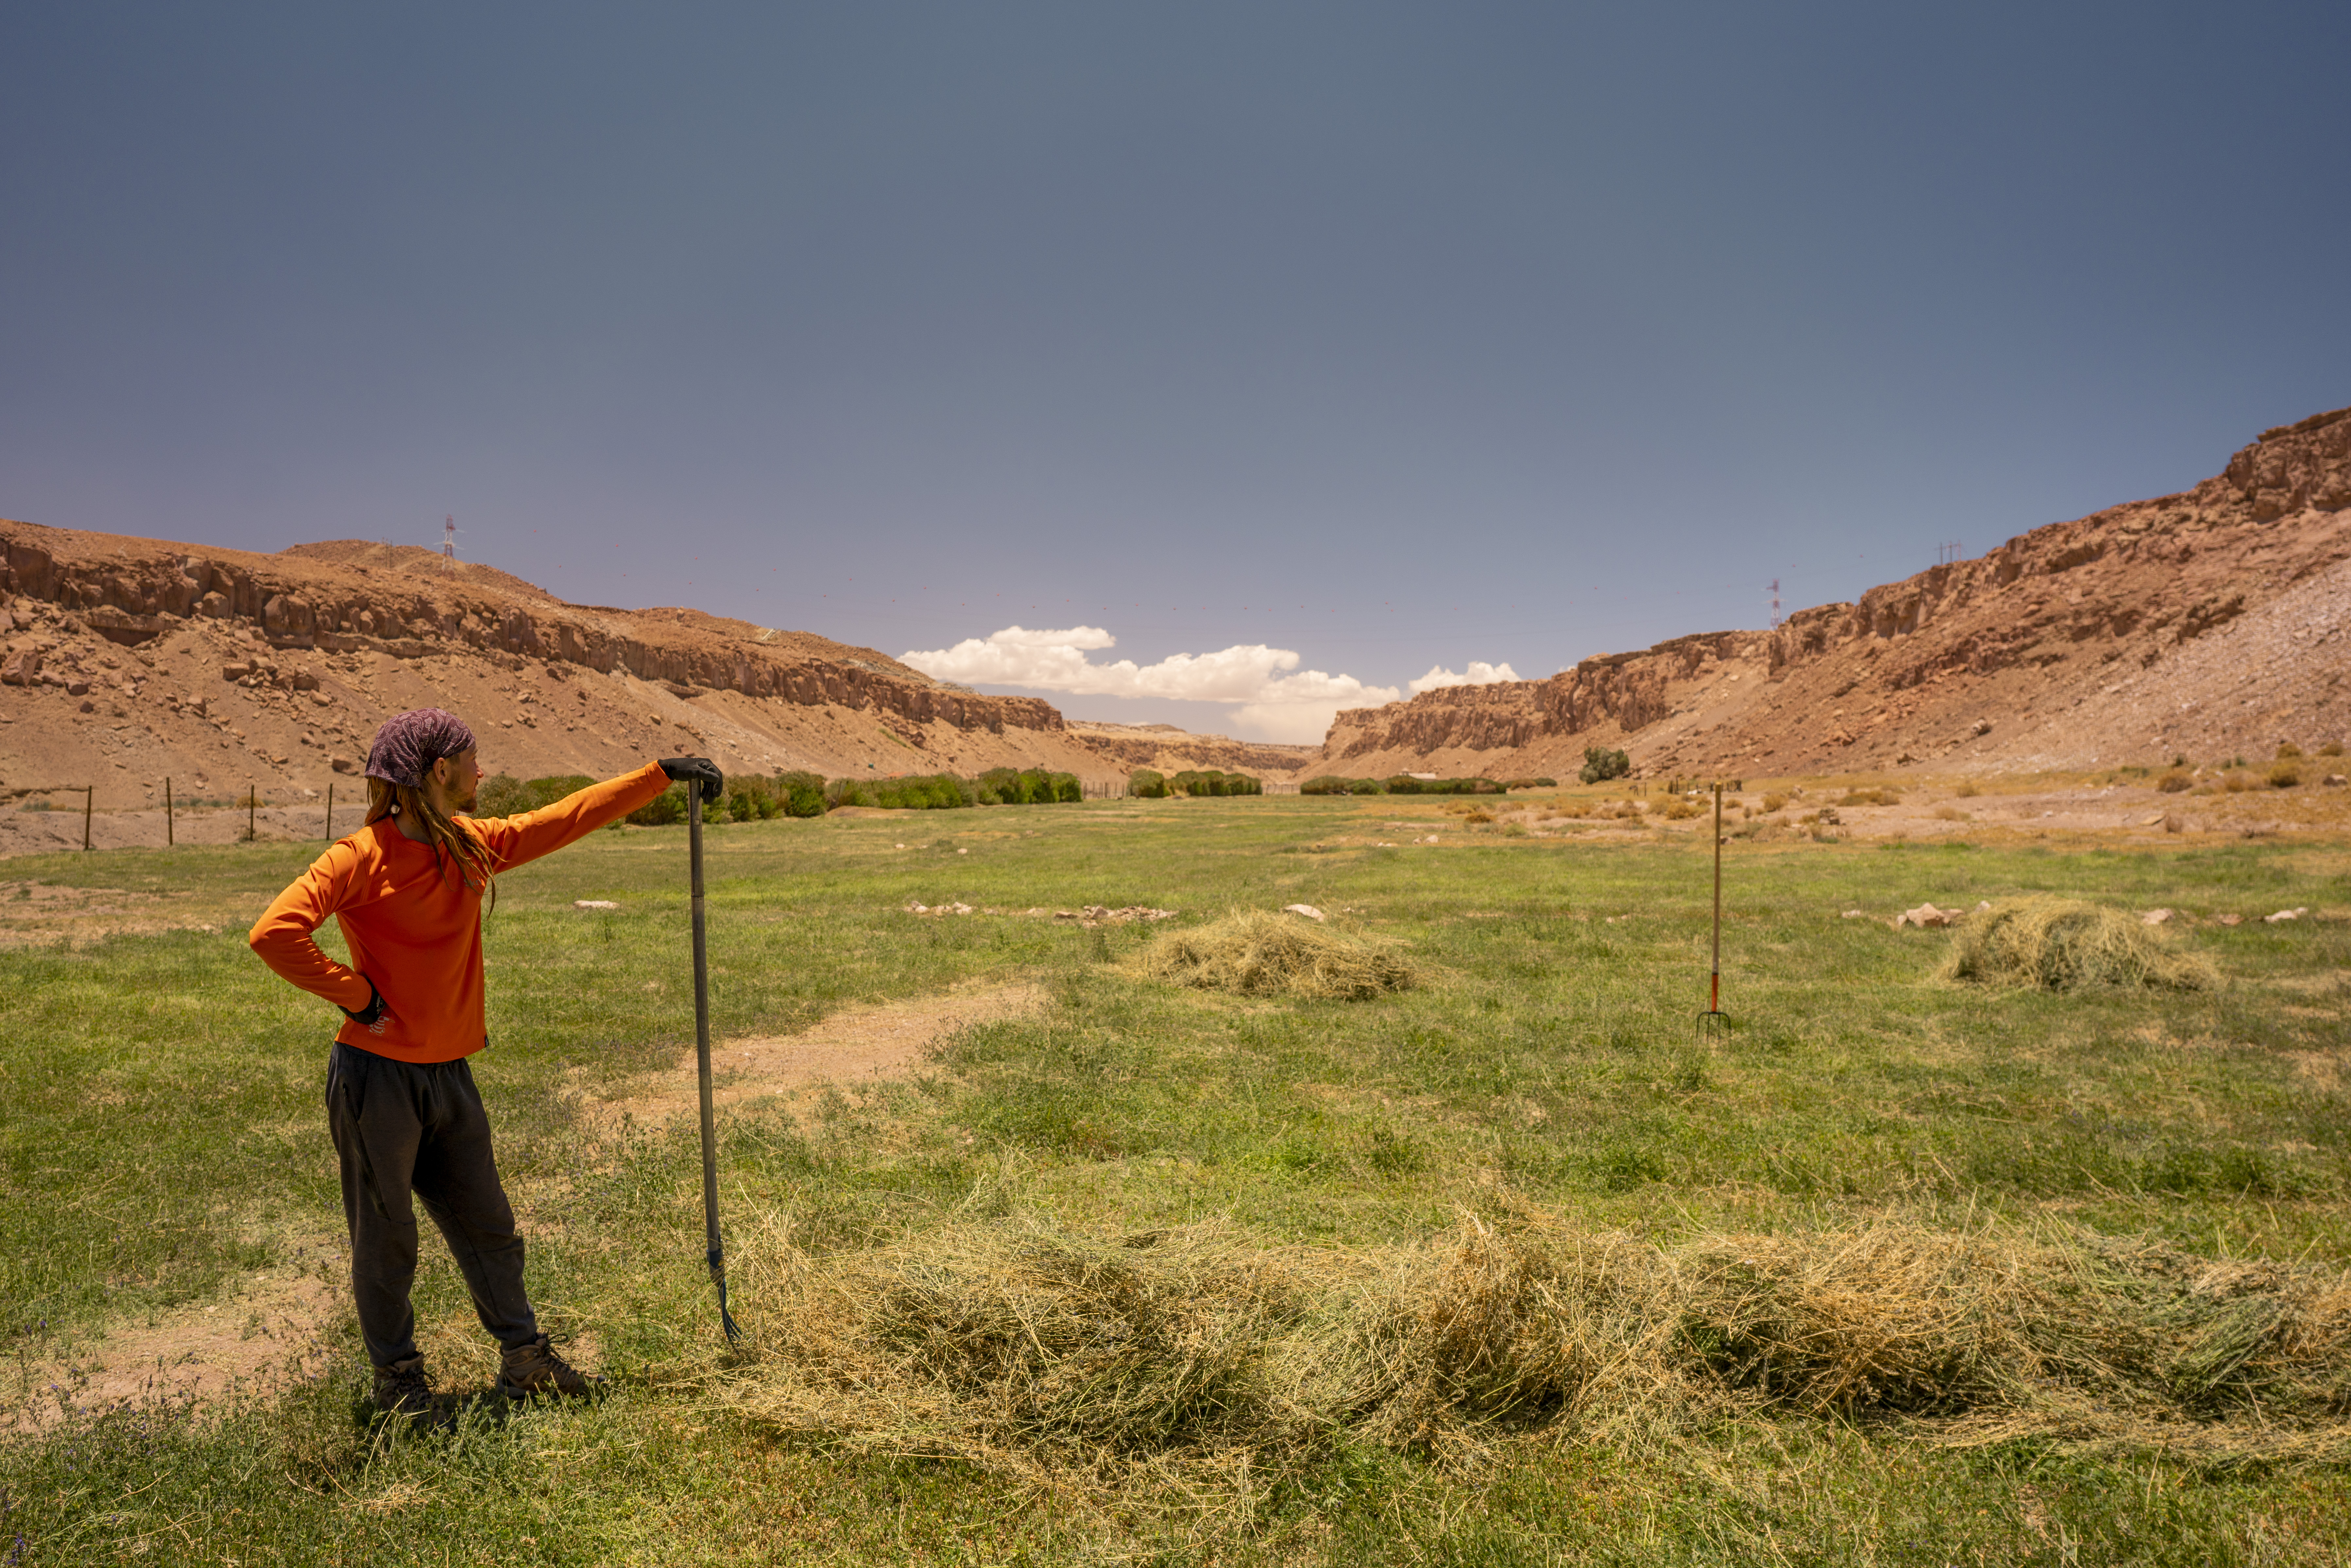 A person harvesting hay with a pitchfork, with the Chilean desert in the background